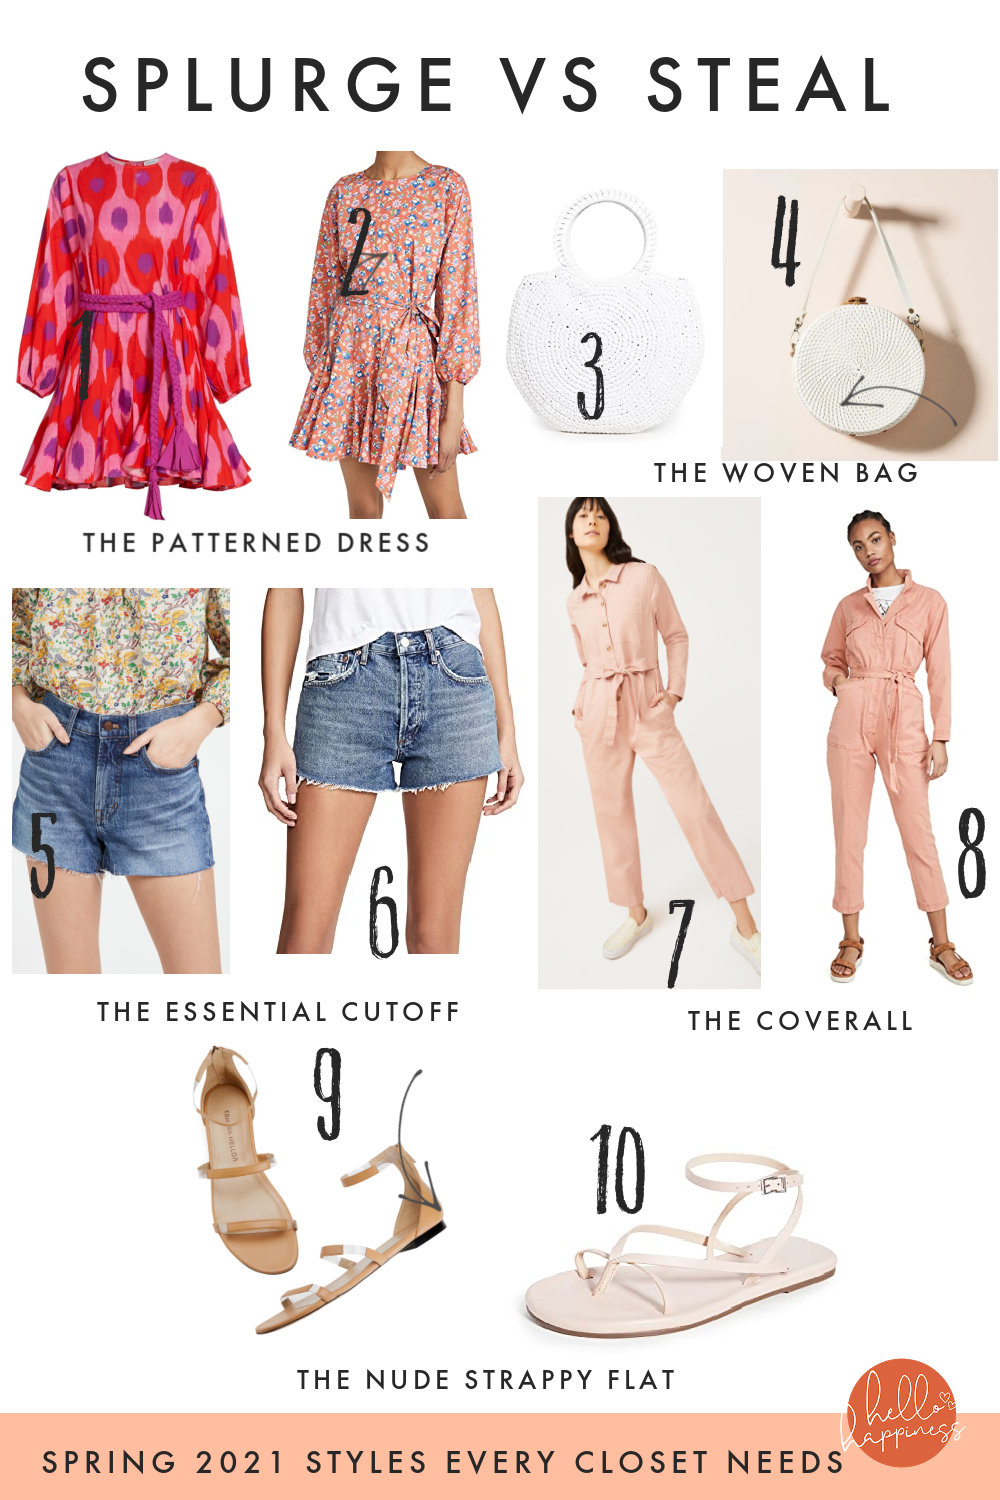 Splurge vs. Steal by popular Nashville fashion blog, Hello Happiness: collage image of tie waist dresses, woven bags, cutoff denim shorts, pink utility jumpsuits, and flat strappy sandals. 